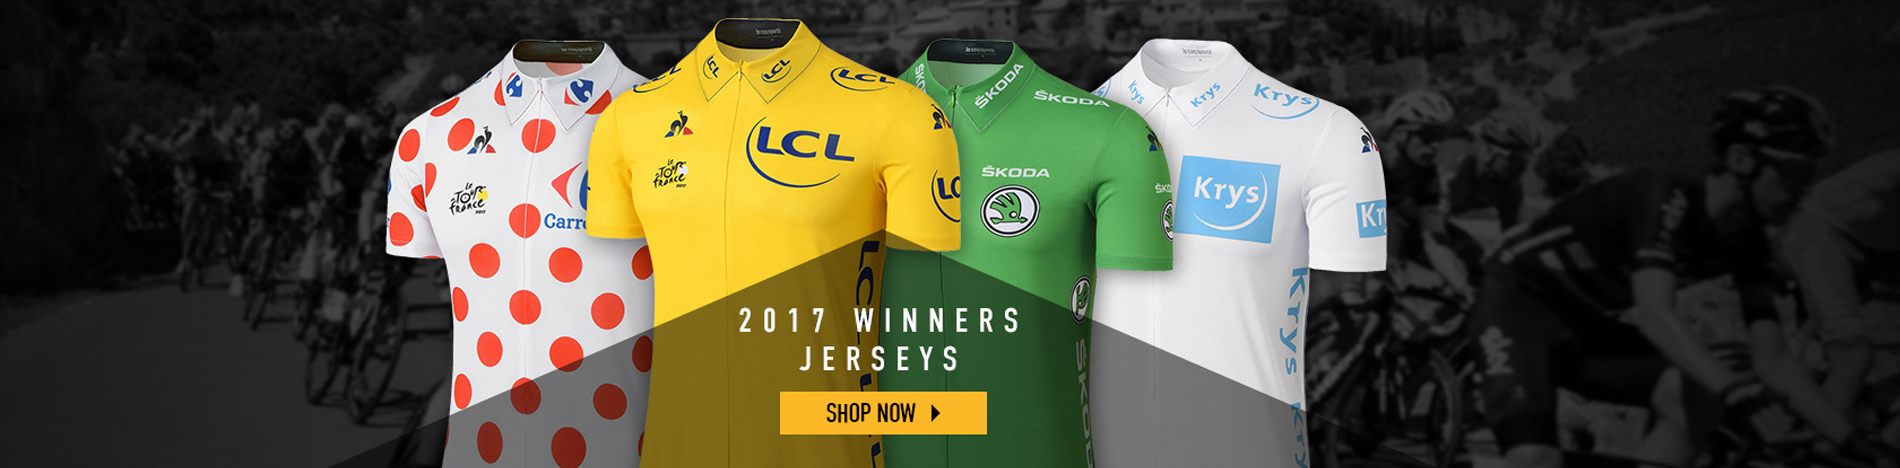 Buy Cycling Jersey